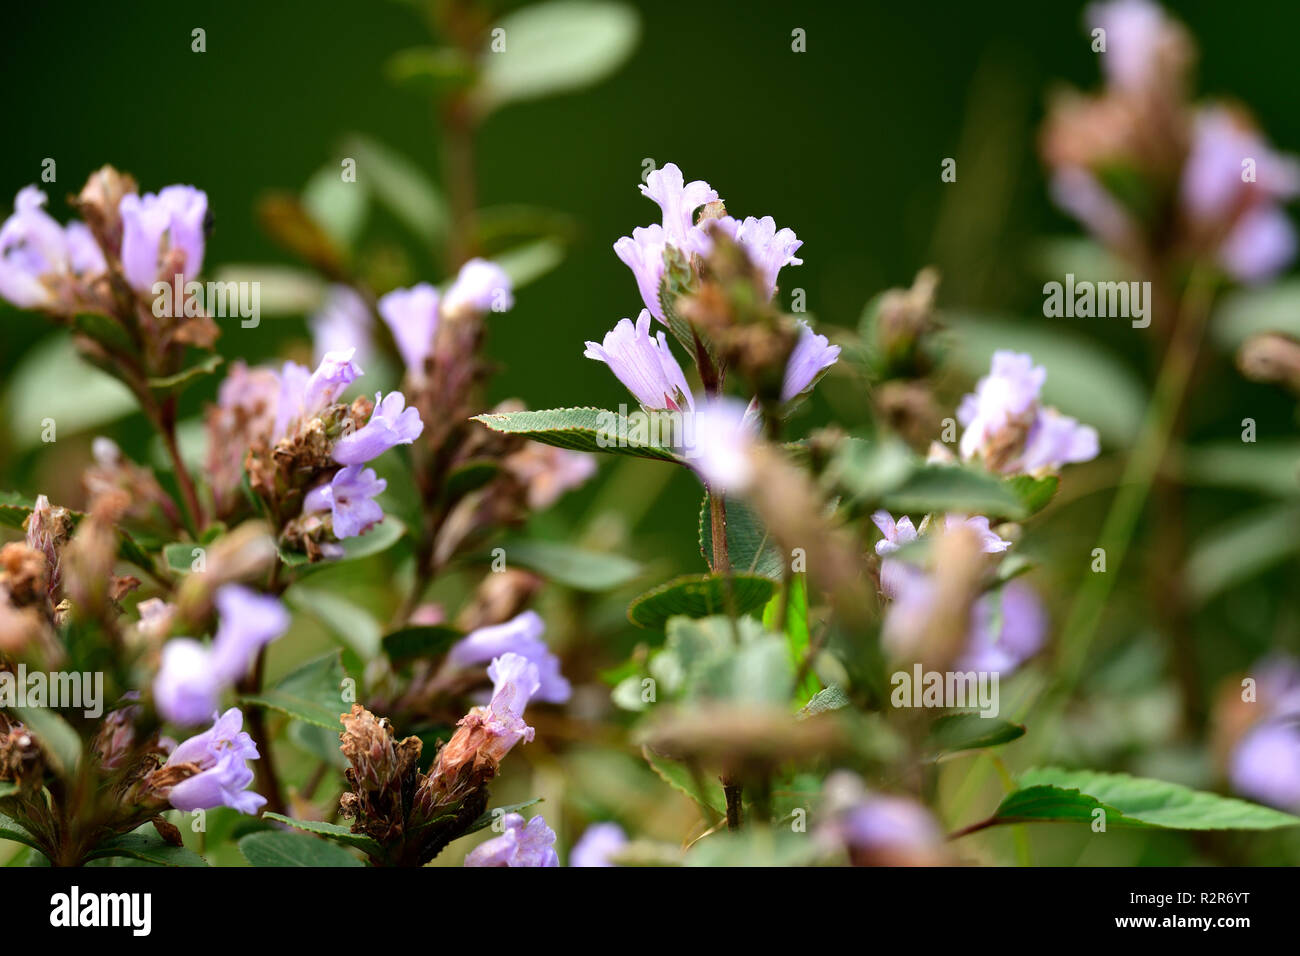 Strobilanthes kunthiana locally known as 'Neelakuriji' blooms at the hills of Munnar, Kerala. Strobilanthes kunthiana blossoms only once in 12 years. Stock Photo